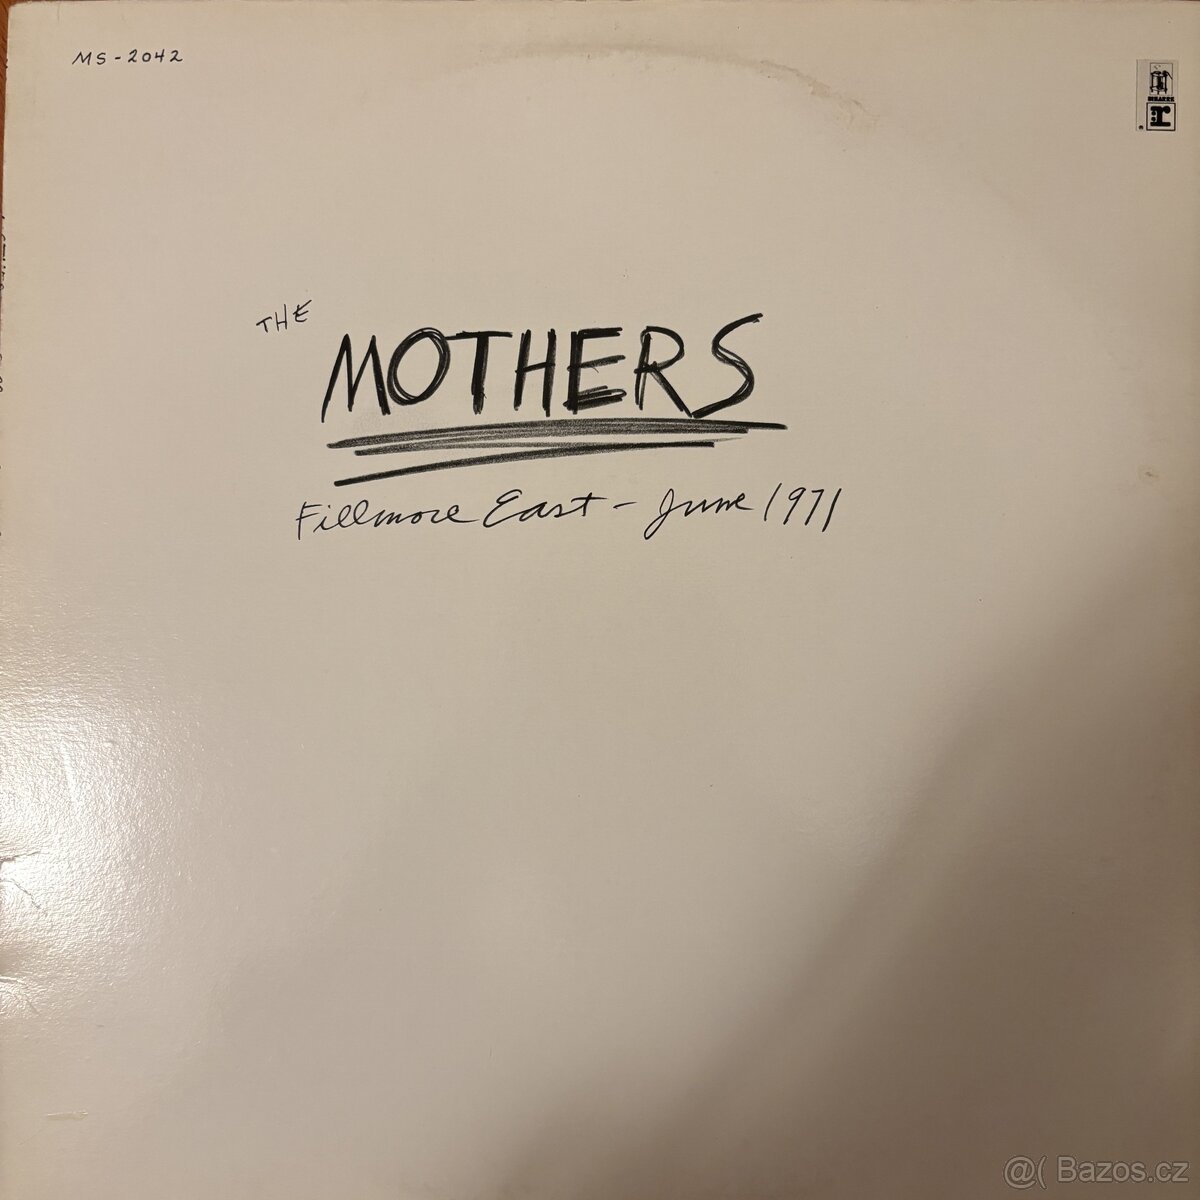 The Mothers – Fillmore East - June 1971. LP